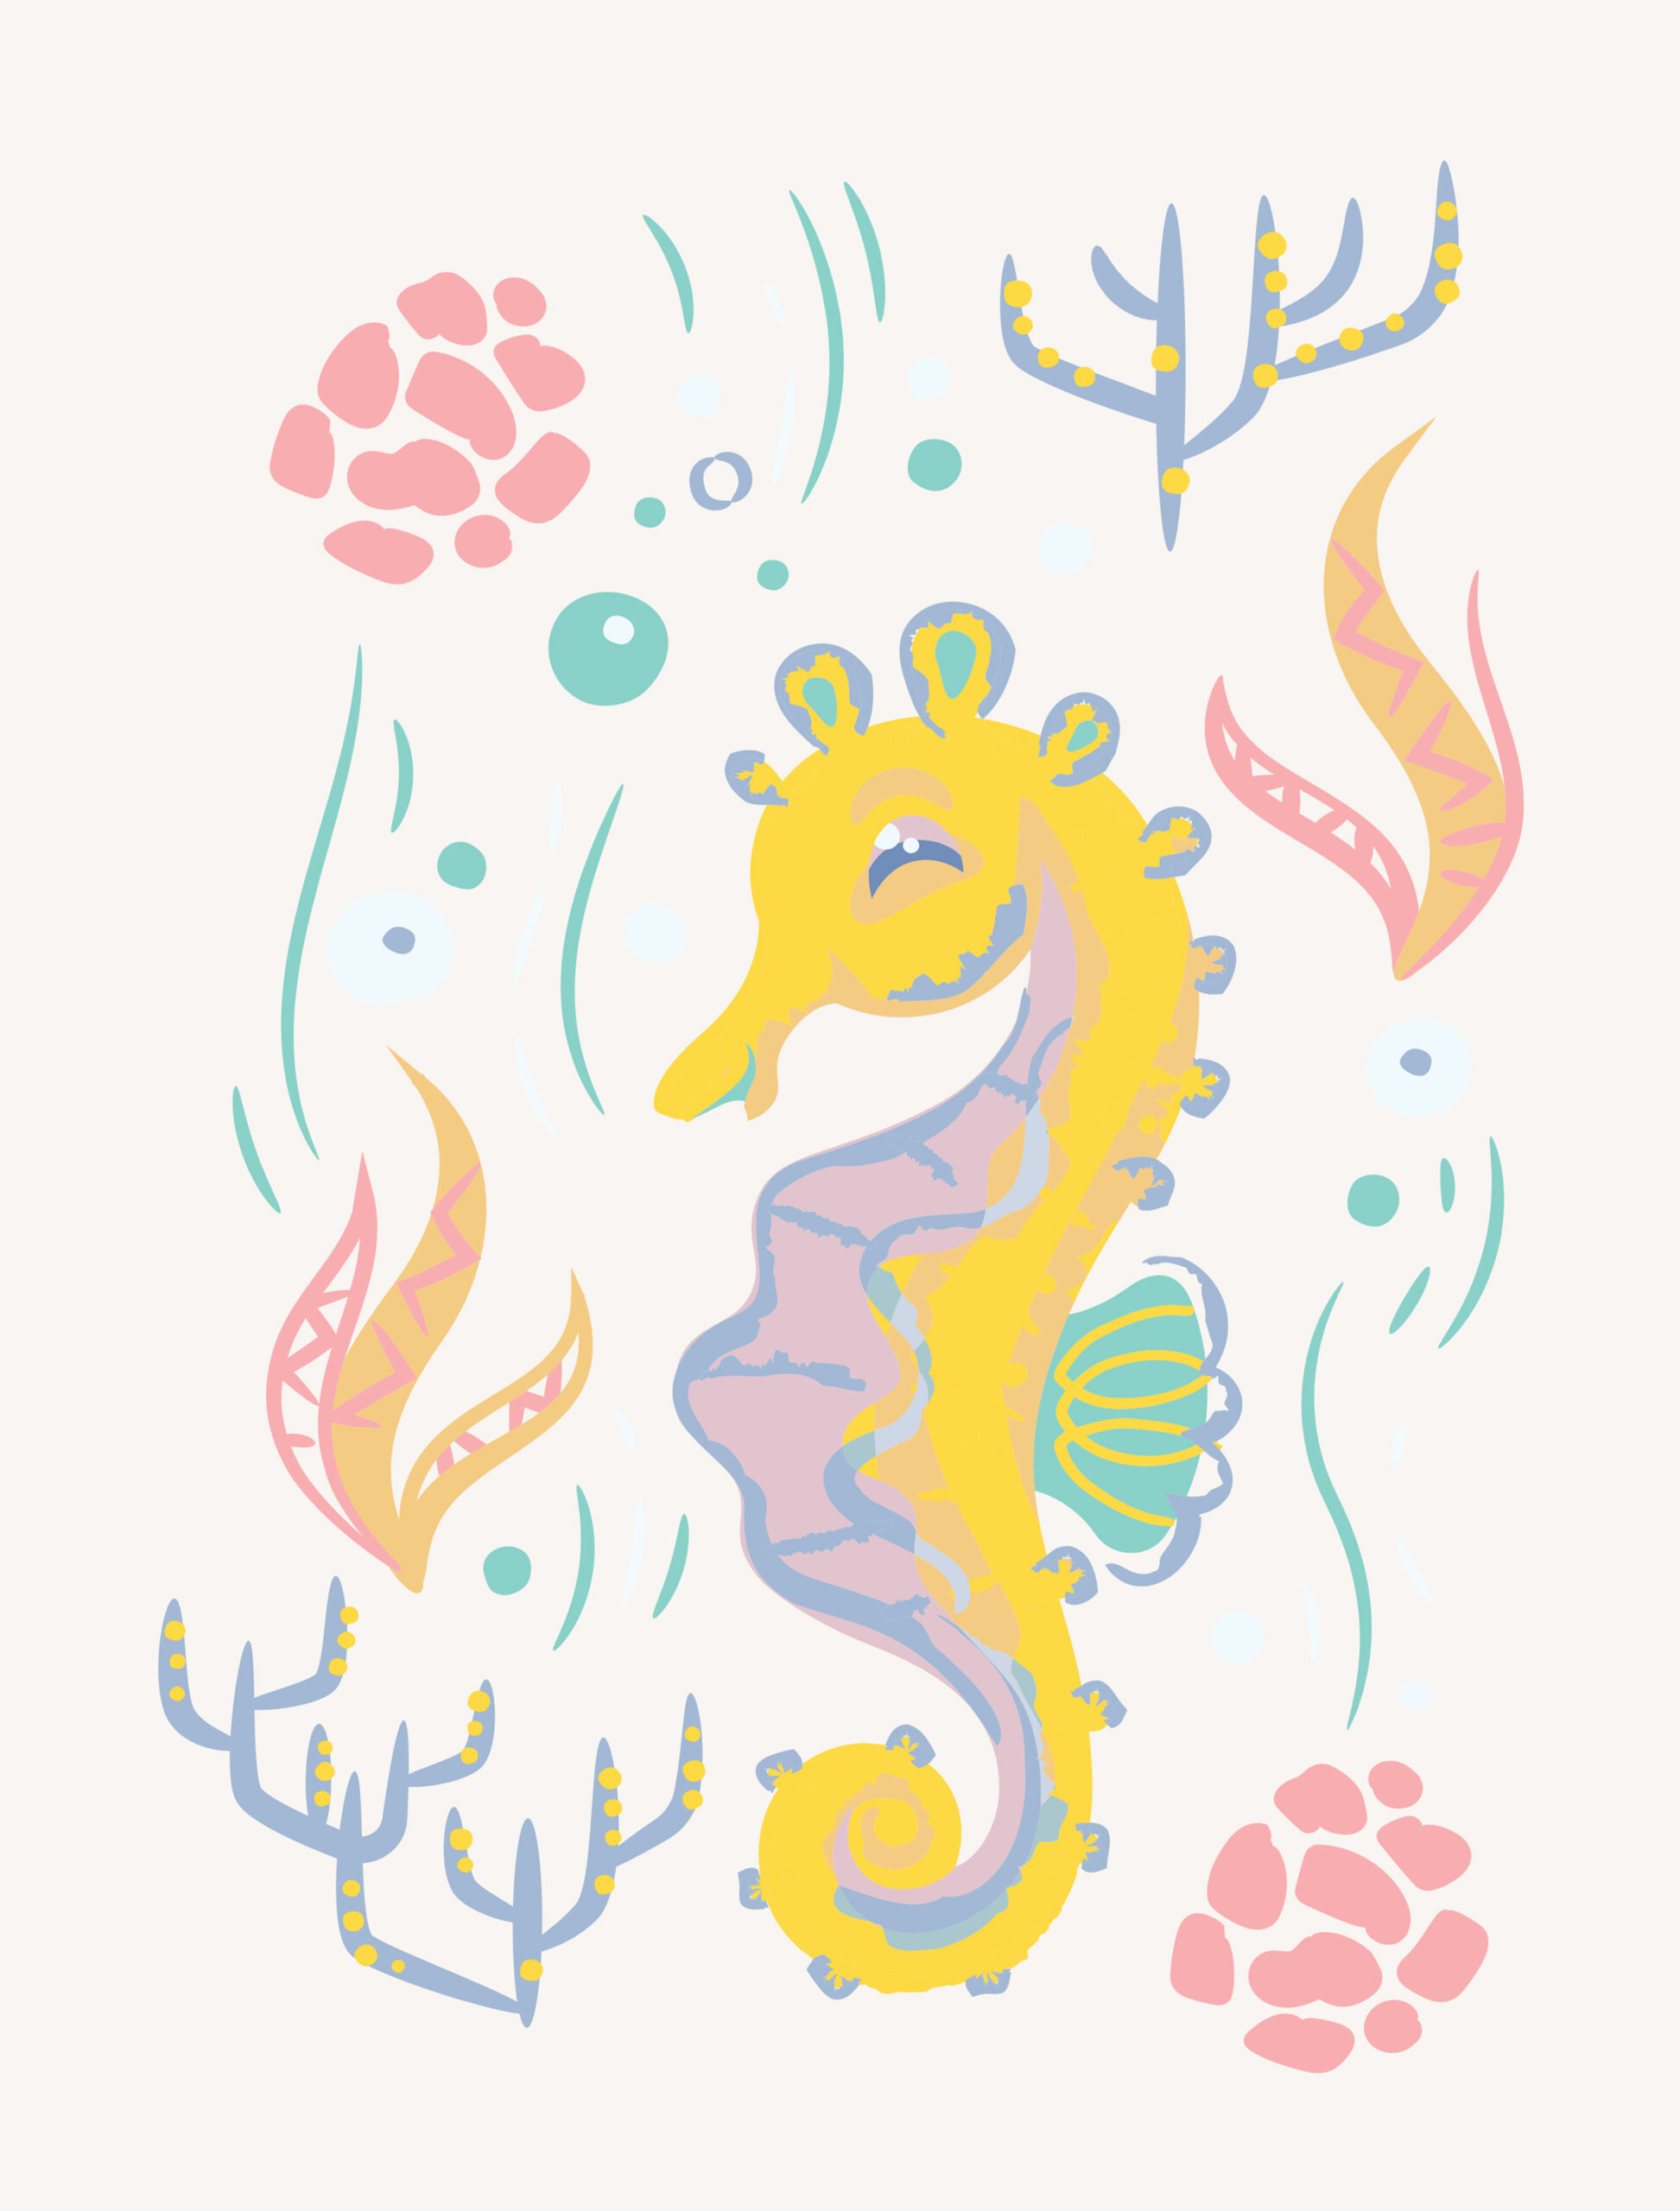 Seahorse character art and habitat graphics using pastel color palette.